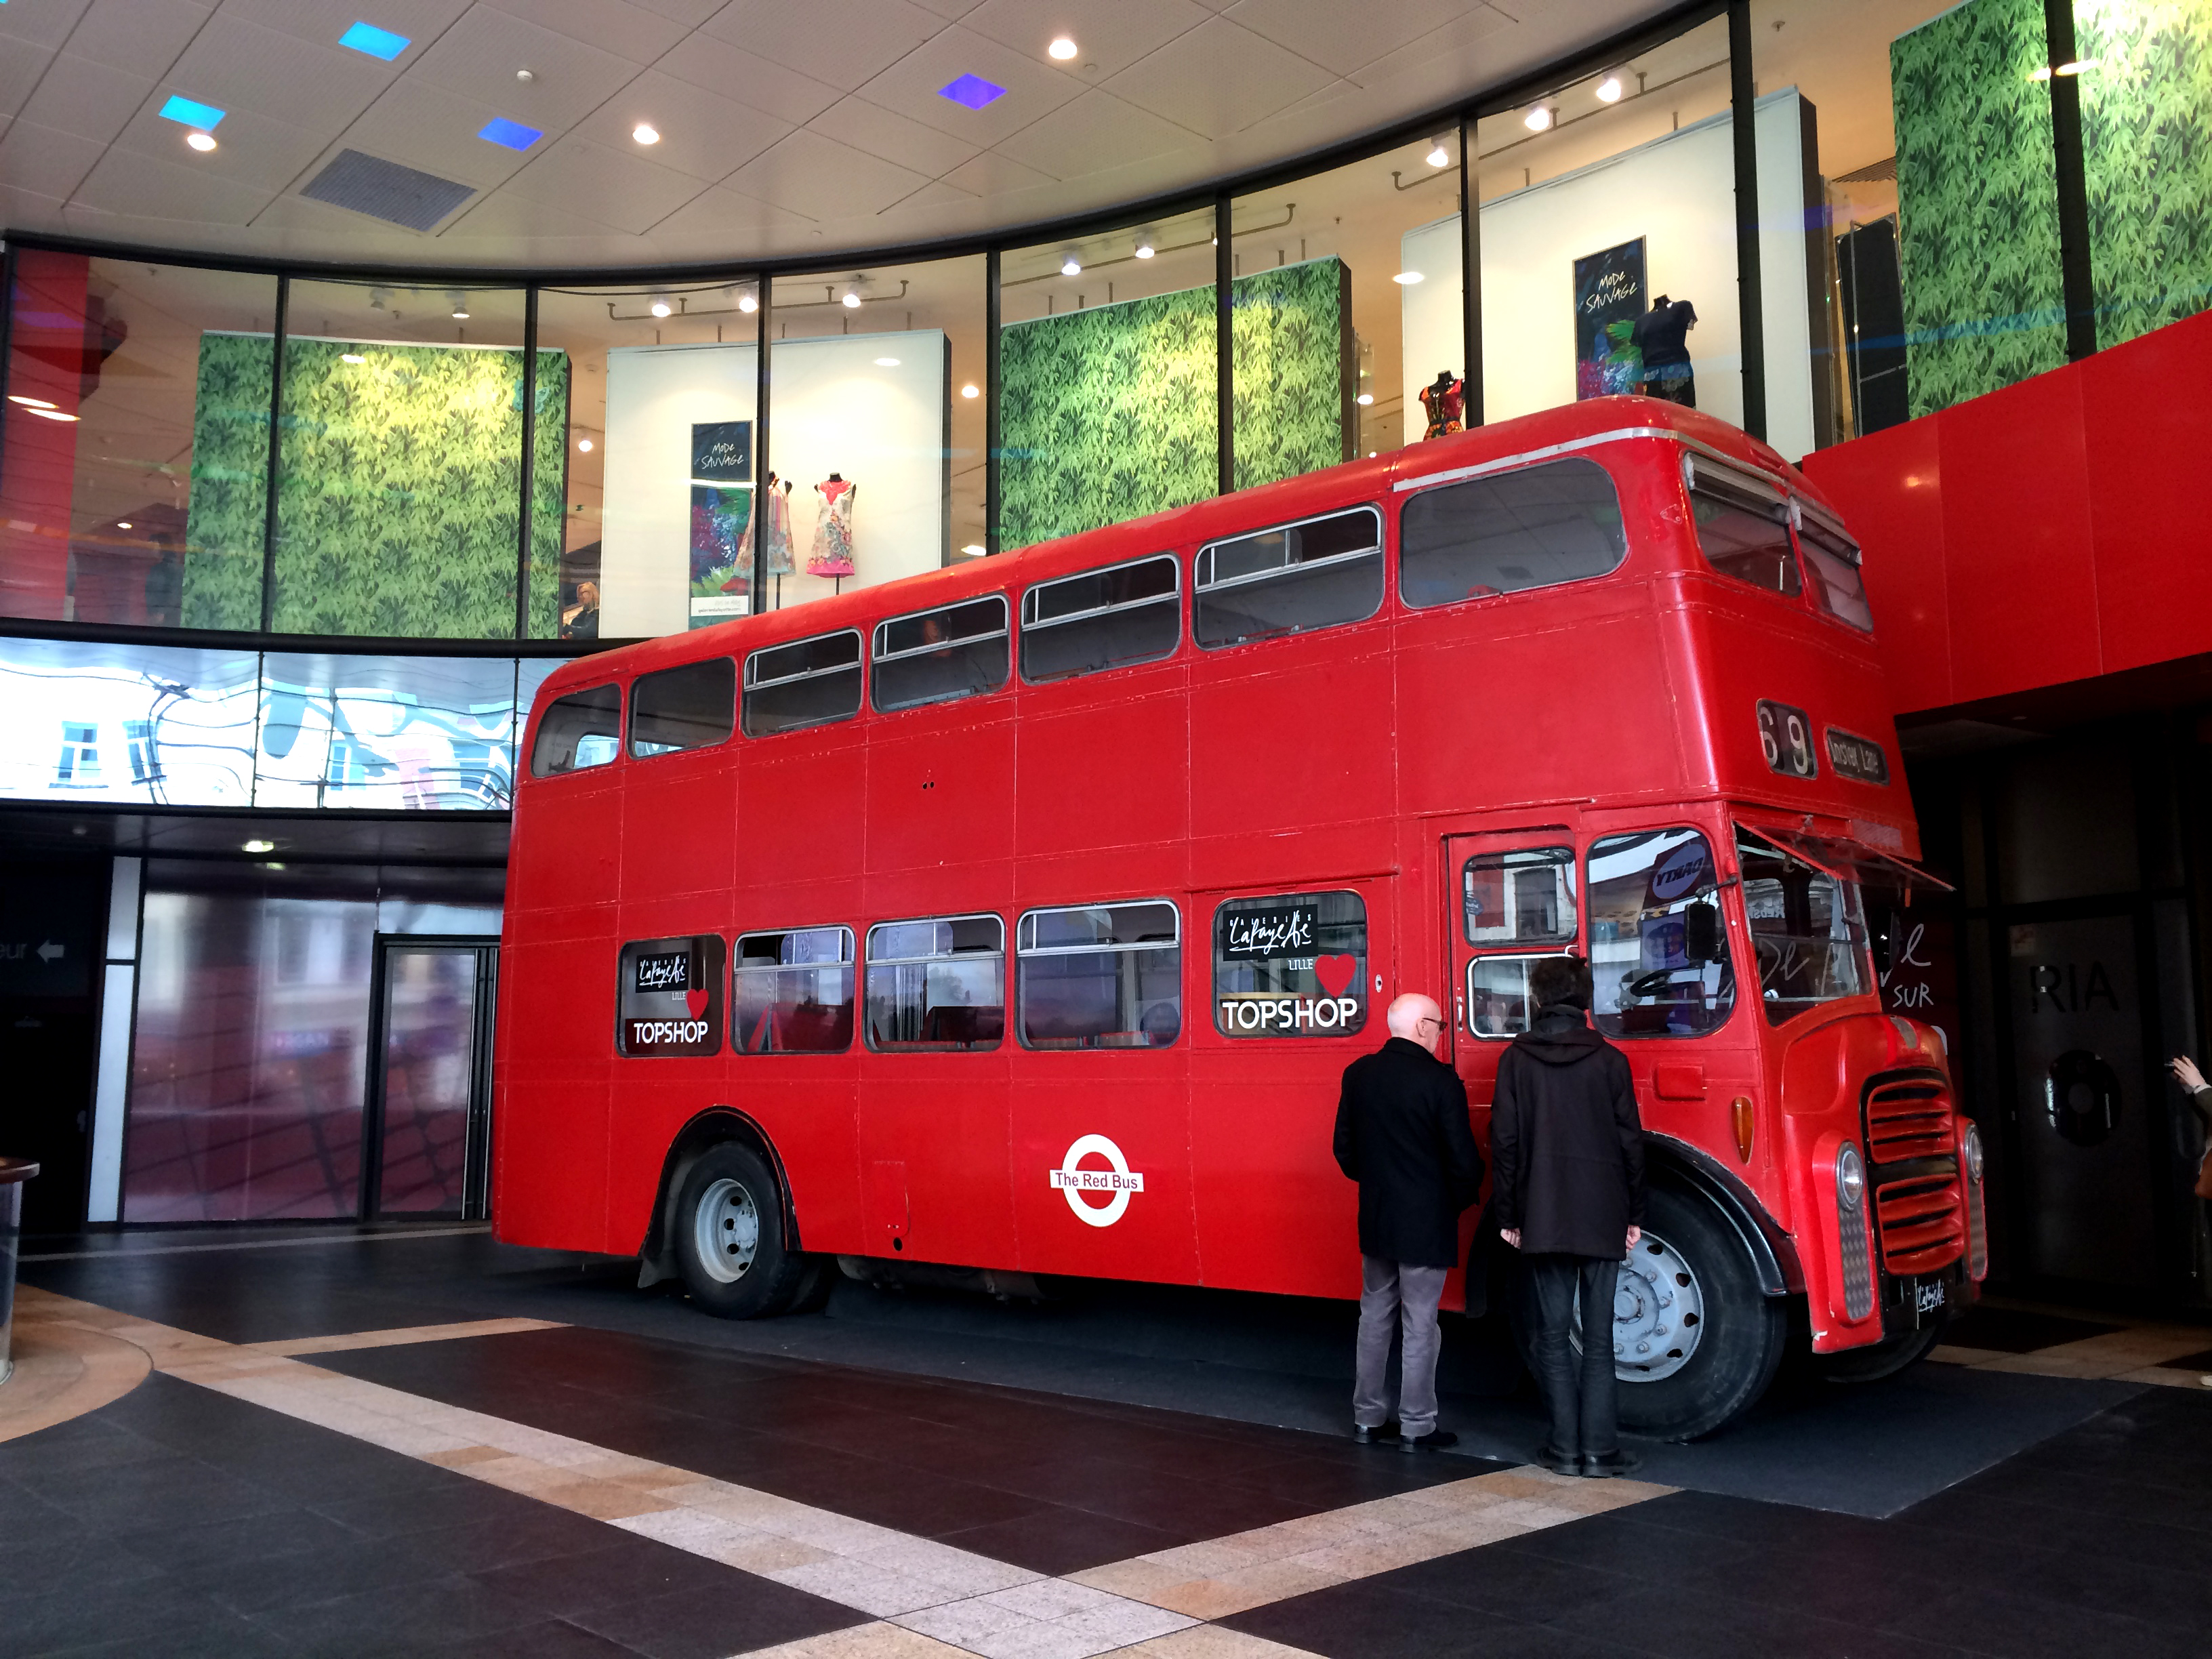 The Red Bus - Kate Moss - Topshop